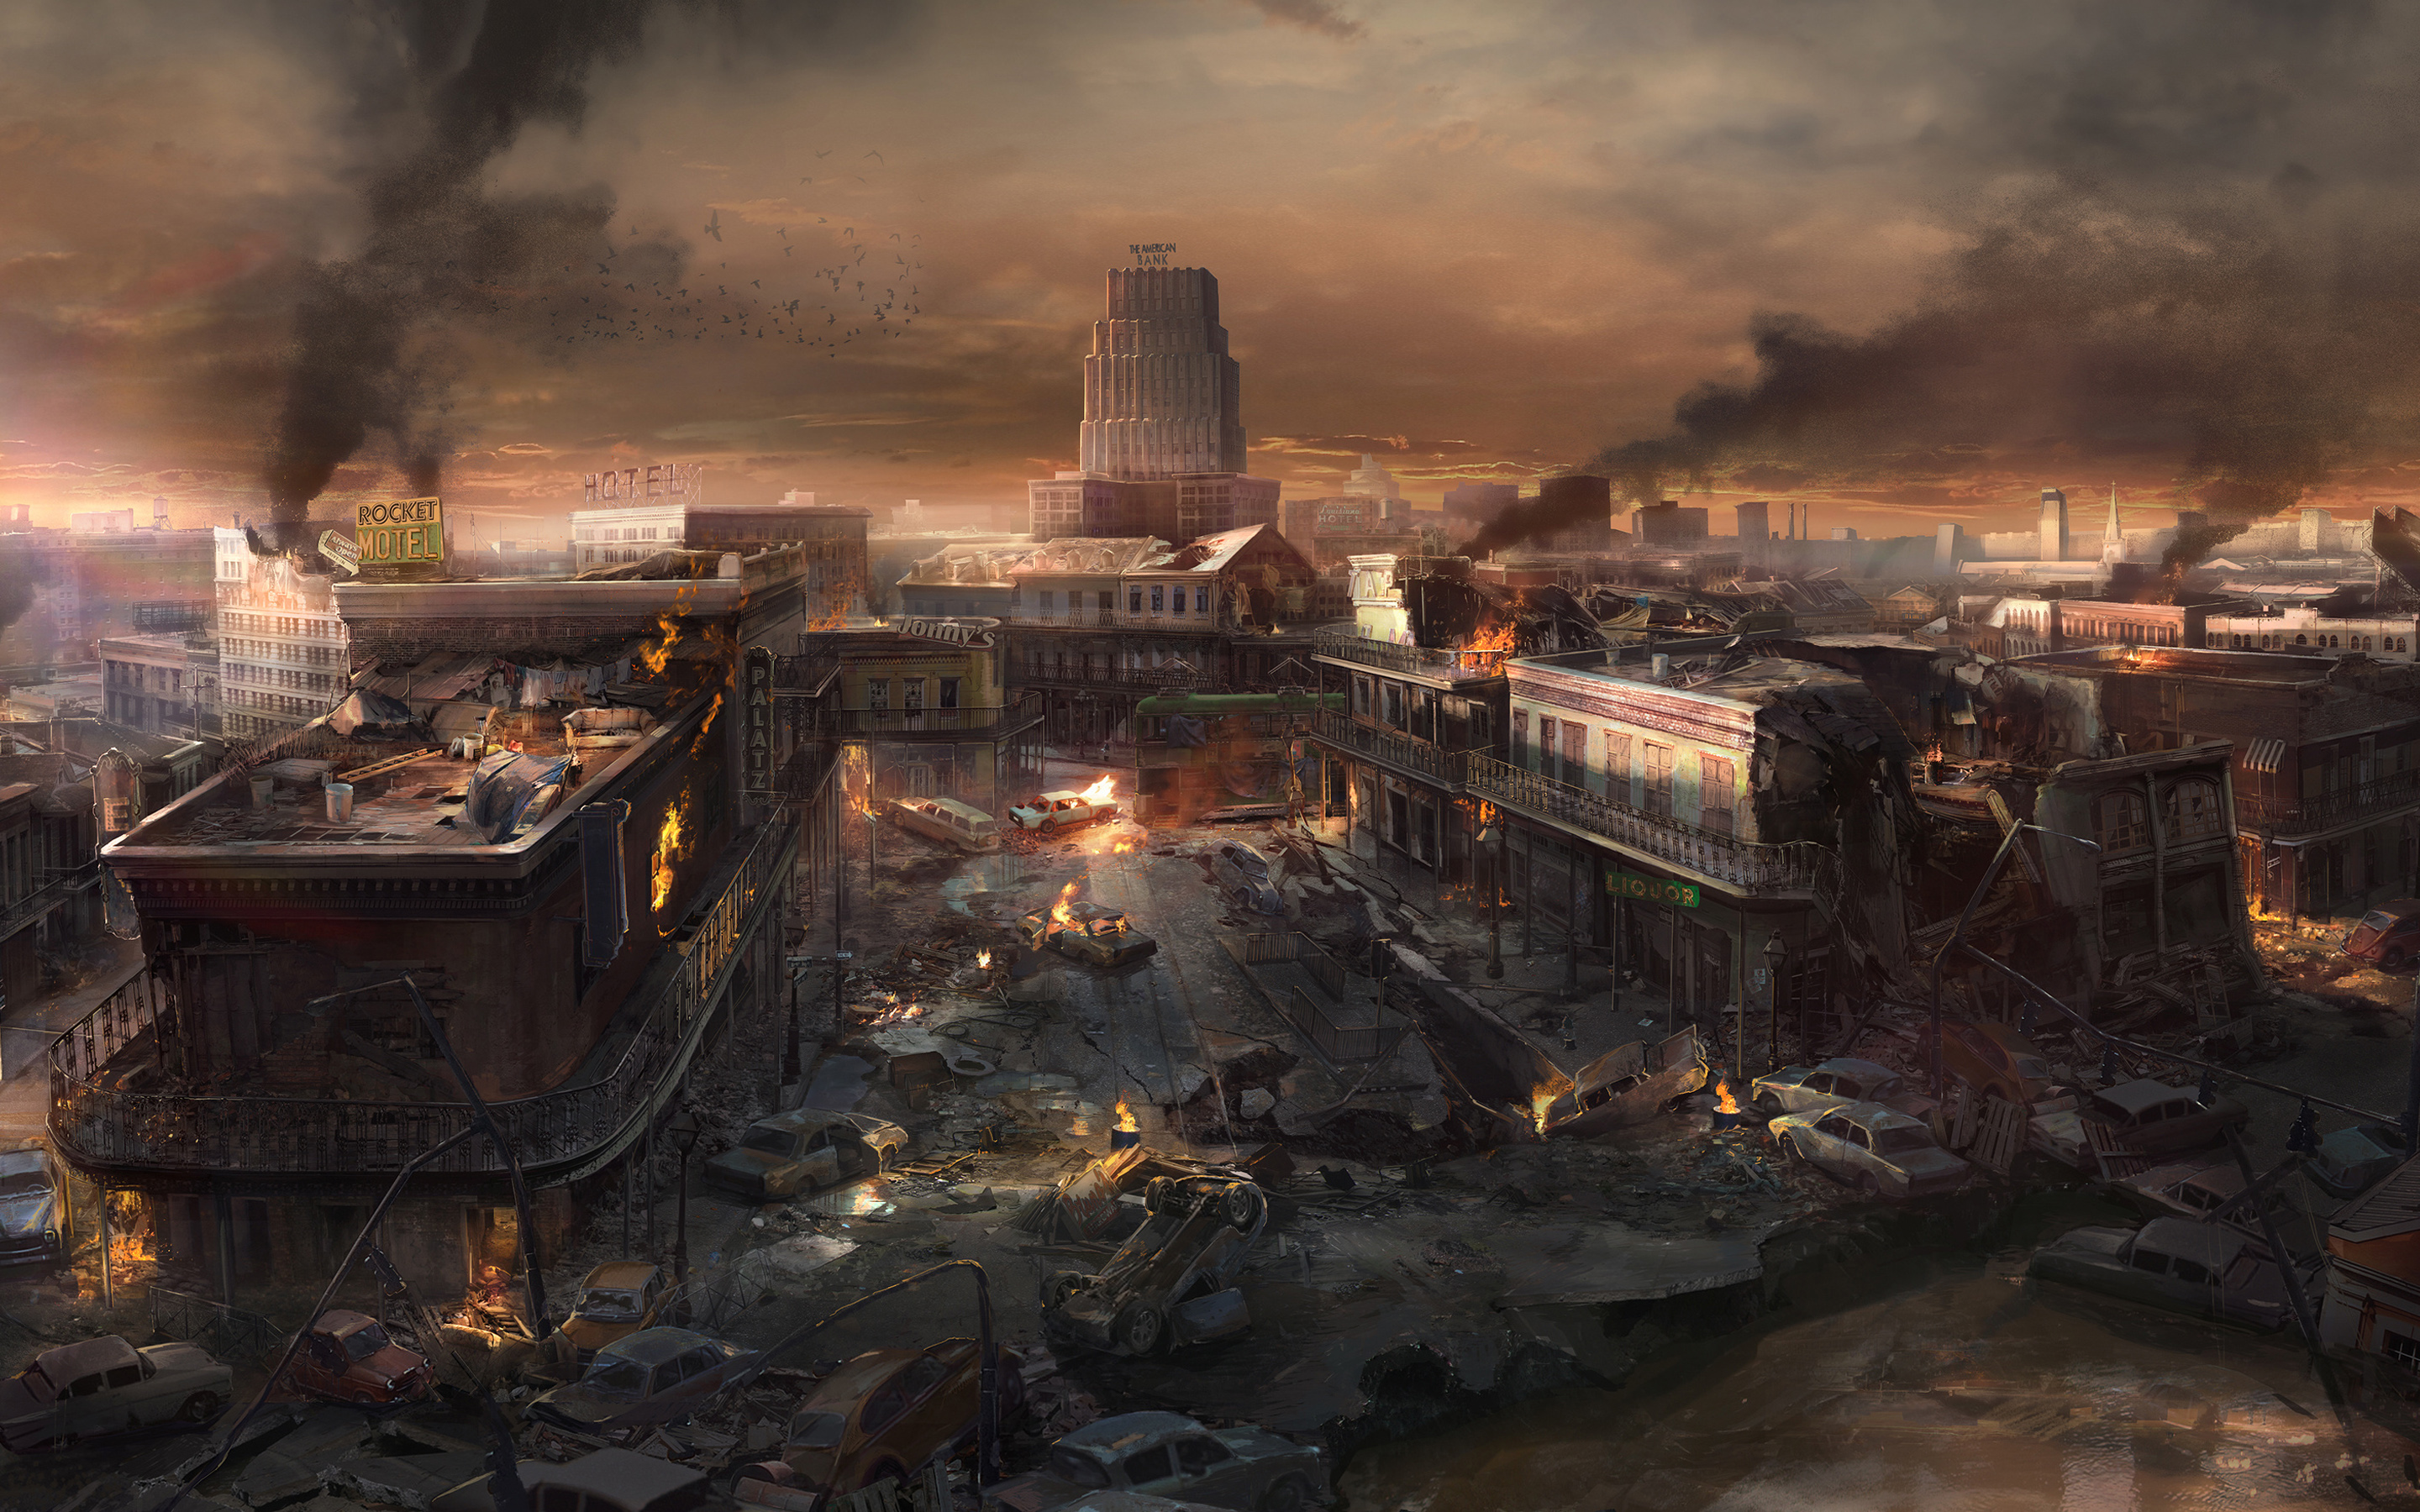 Download wallpaper Wolfenstein II, poster, promo, apocalypse, ruined city, destroyed city for desktop with resolution 2880x1800. High Quality HD picture wallpaper